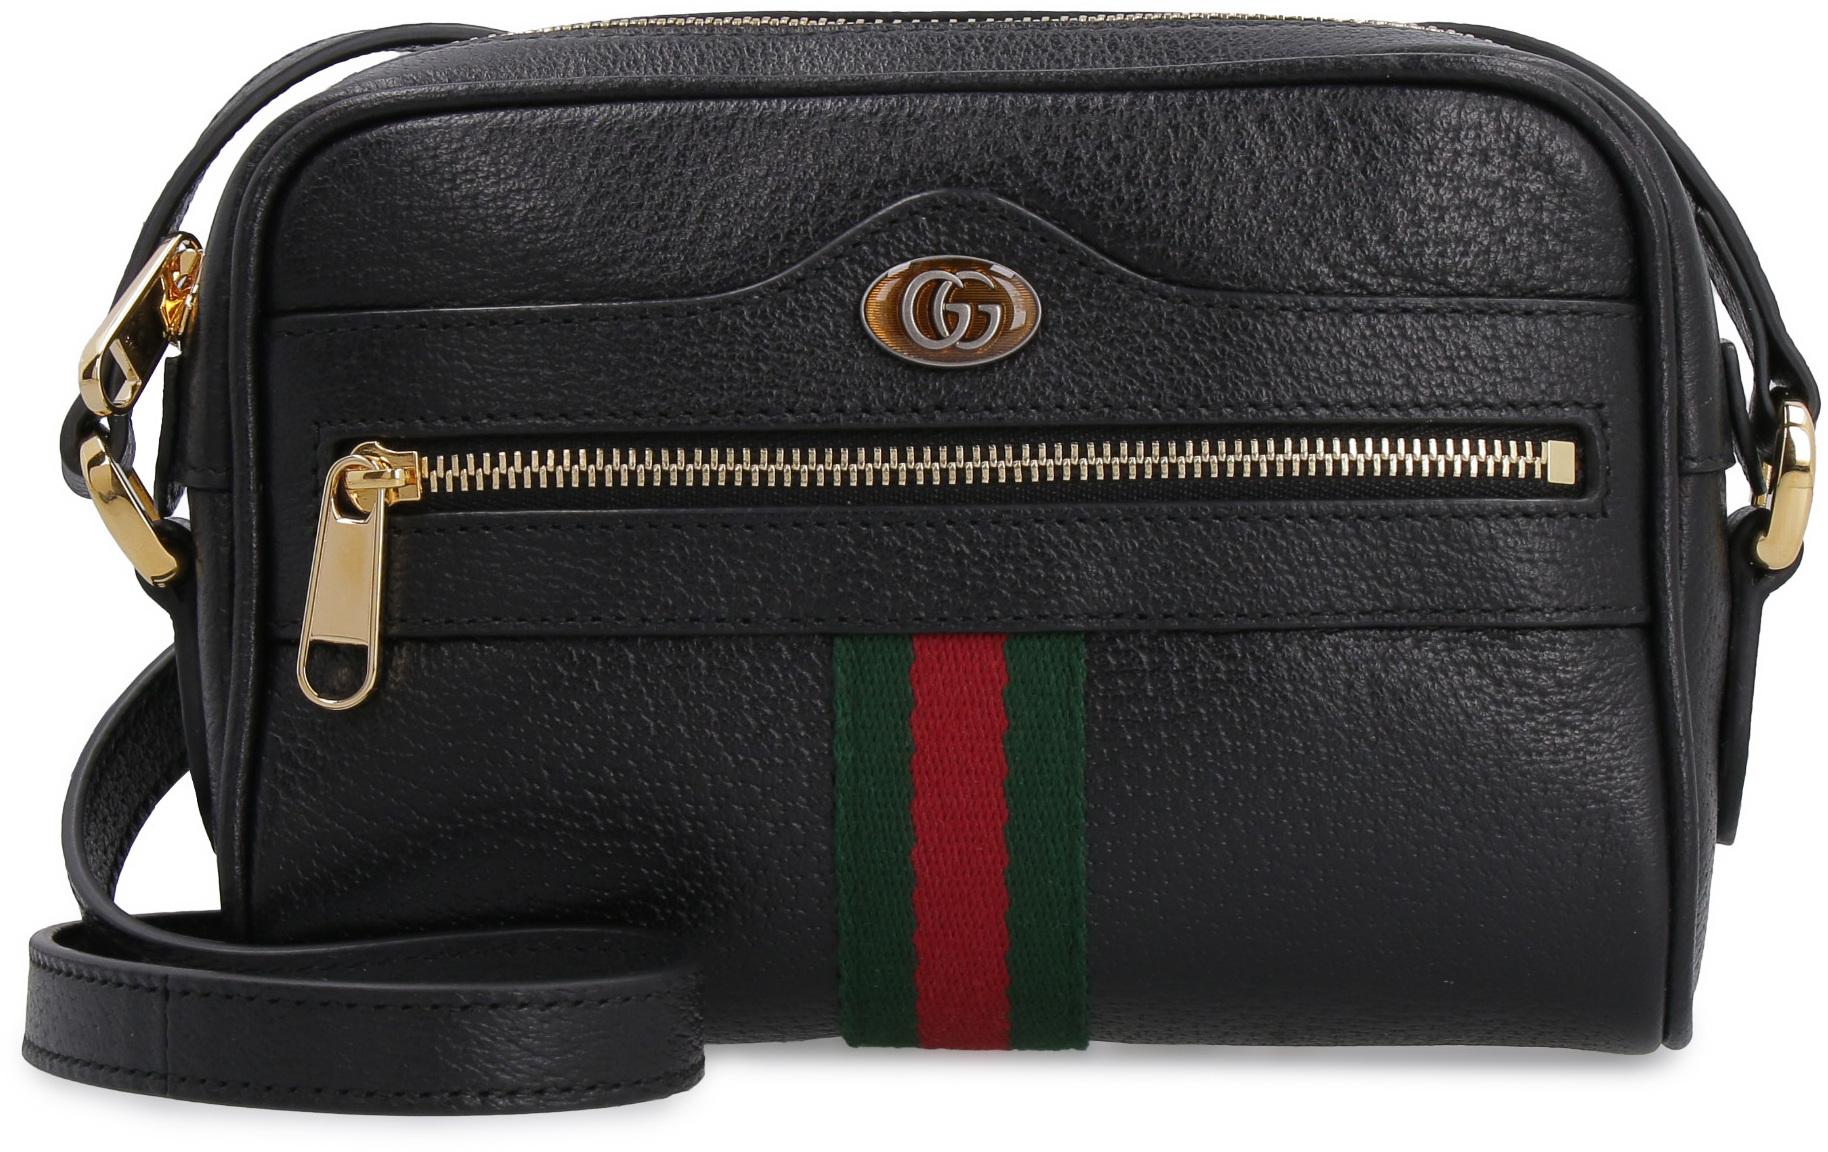 Gucci Suede Ophidia Leather Crossbody Bag in Black - Lyst